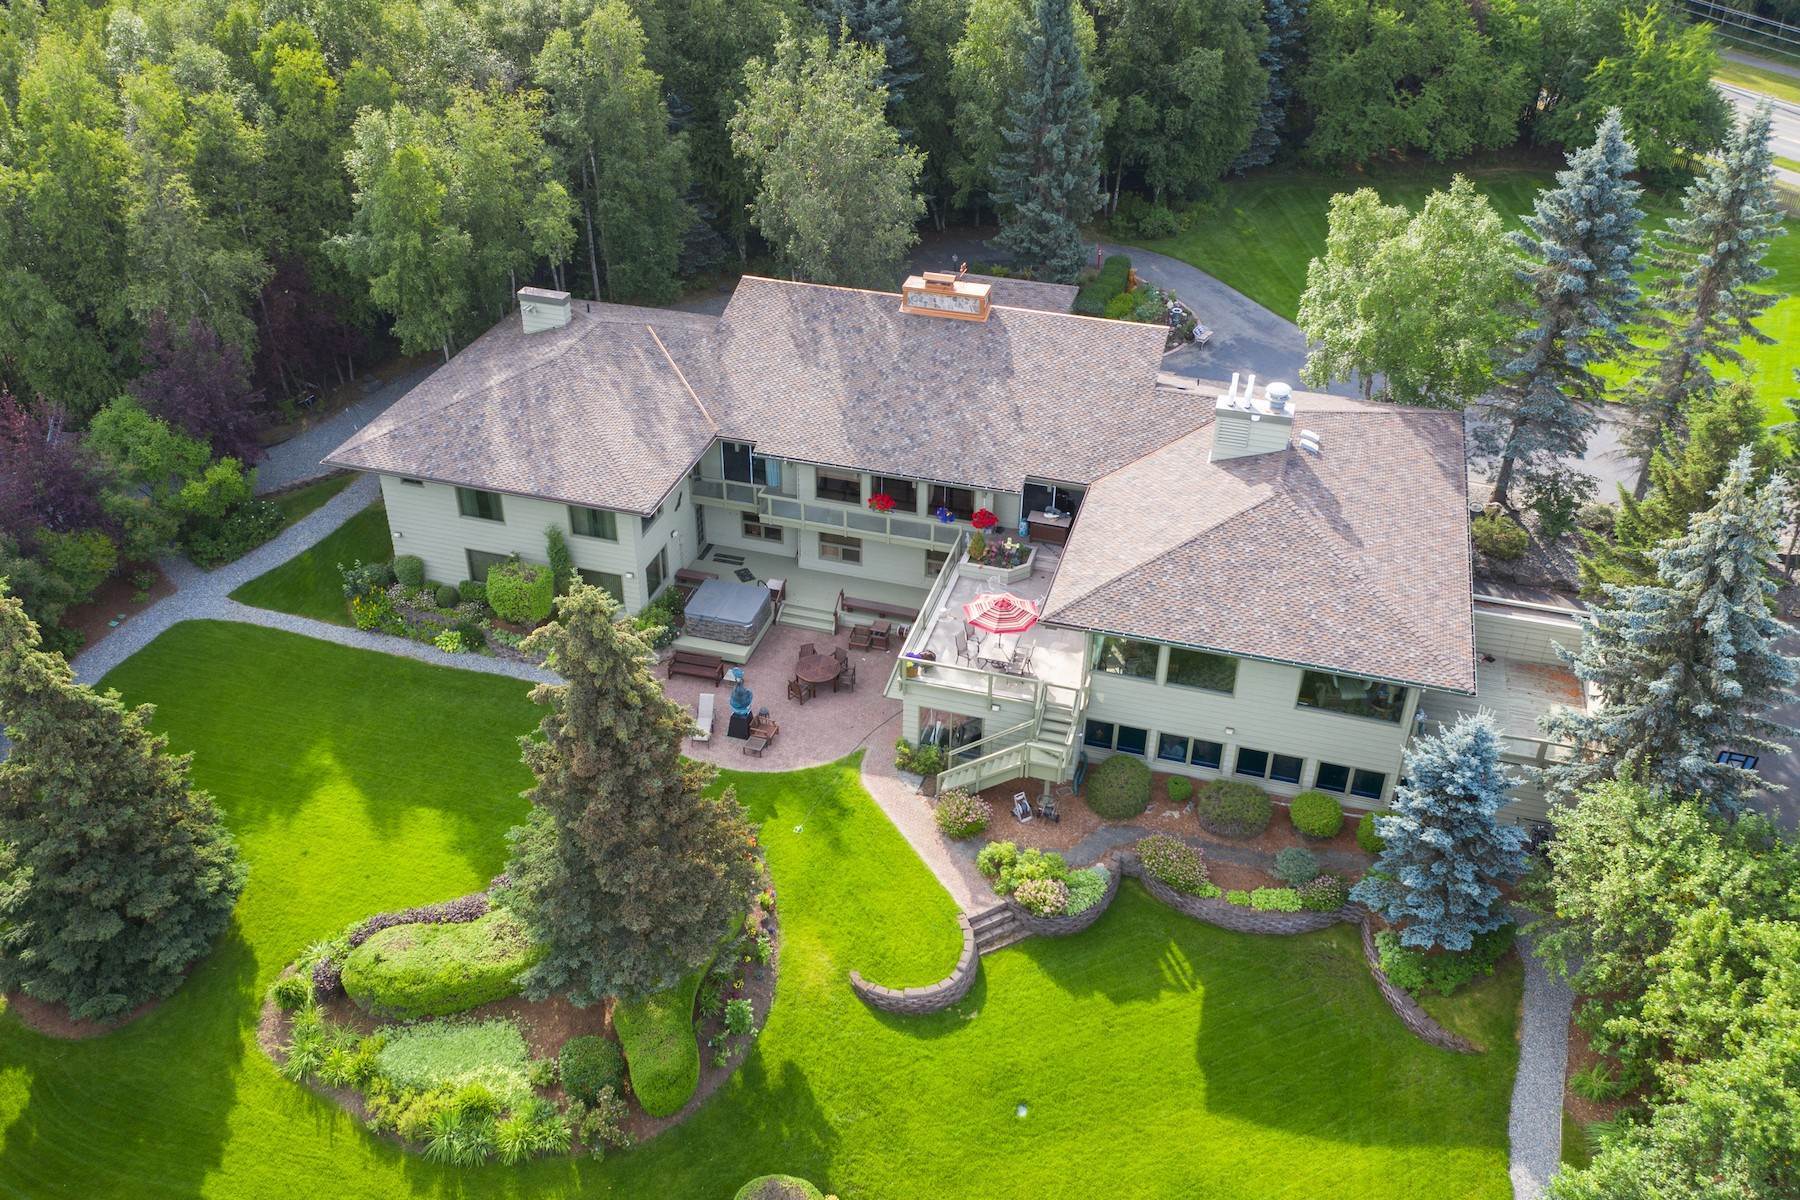 Property for Sale at Historic Carr's Family Mansion 2501 W 100th Avenue Anchorage, Alaska 99515 United States